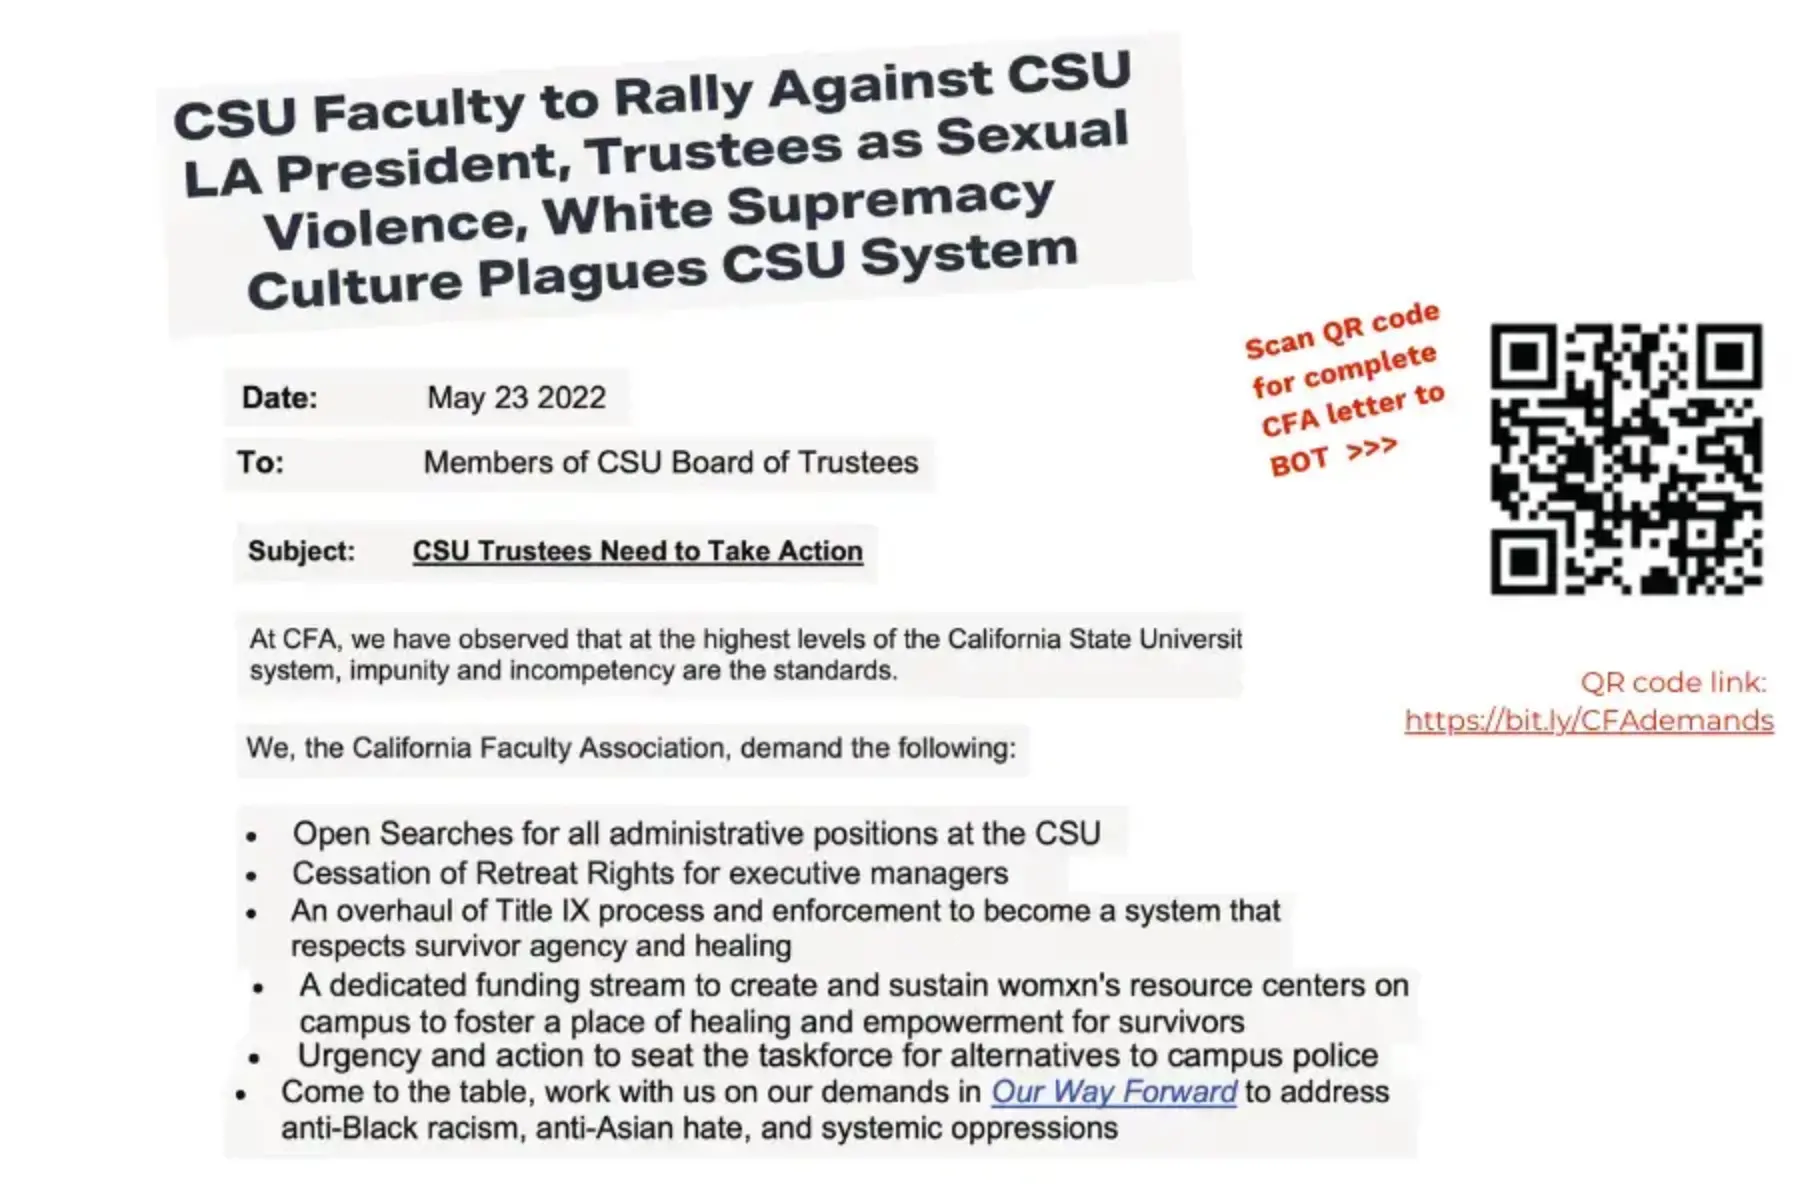 White background with cut out newspaper open letter with black text that reads: CSU Faculty to Rally Against CSU LA President, Trustees as Sexual Violence, White Supremacy Culture Plagues CSU System; Date: May 23 2022; To: Members of CSU Board of Trustees; Subject: CSU Trustees Need to Take Action; At CFA, we have observed that at the highest levels of the California State University system, impunity and incompetency ae the standards. We, the California Faculty Association, demand the following: (bullet list) Open Searches for all administrative positions at the CSU; Cessation of Retreat Rights for executive managers; An overhaul of the Title IX process and enforcement to become a system that respects survivor agency and healing; A dedicated funding stream to create and sustain womxn’s resource centers on campus to foster a place of healing and empowerment for survivors; Urgency and action to seat the taskforce for alternatives to campus police’ Come to the table, work with us on our demands in “Our Way Forward” to address anti-Black racism, anti-Asian hate, and systemic oppressions. To the right is red text saying “Scan QR code for complete CFA letter to BOT” with arrows pointing to a black and white QR code and red text spelling out the QR code link to https://bit.ly/CFAdemands.